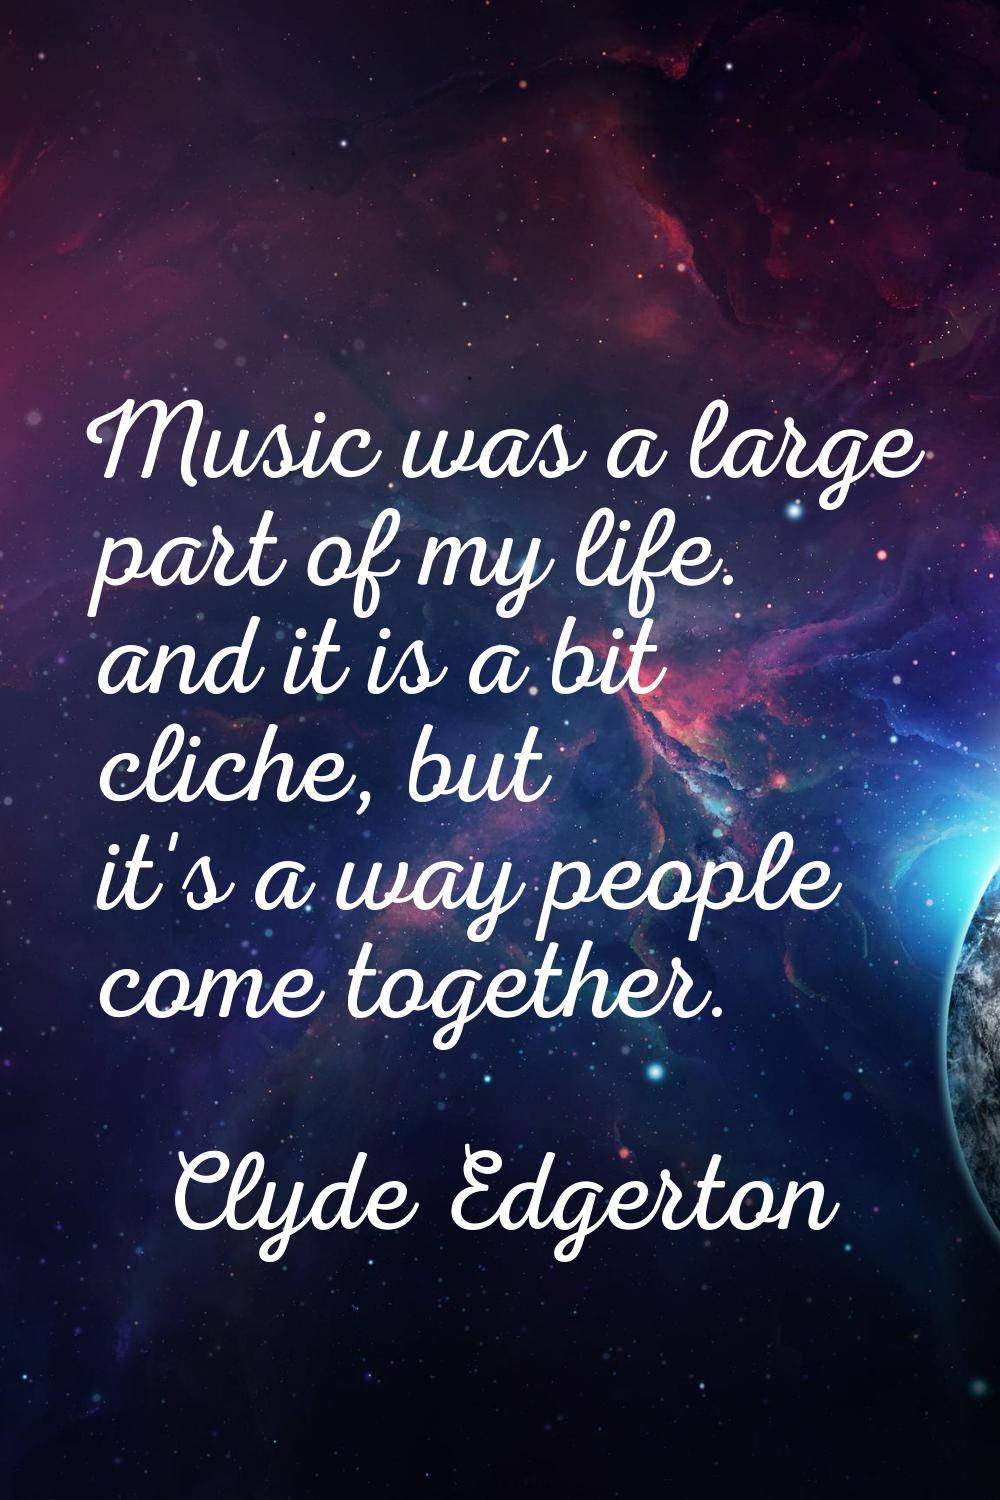 Music was a large part of my life. and it is a bit cliche, but it's a way people come together.